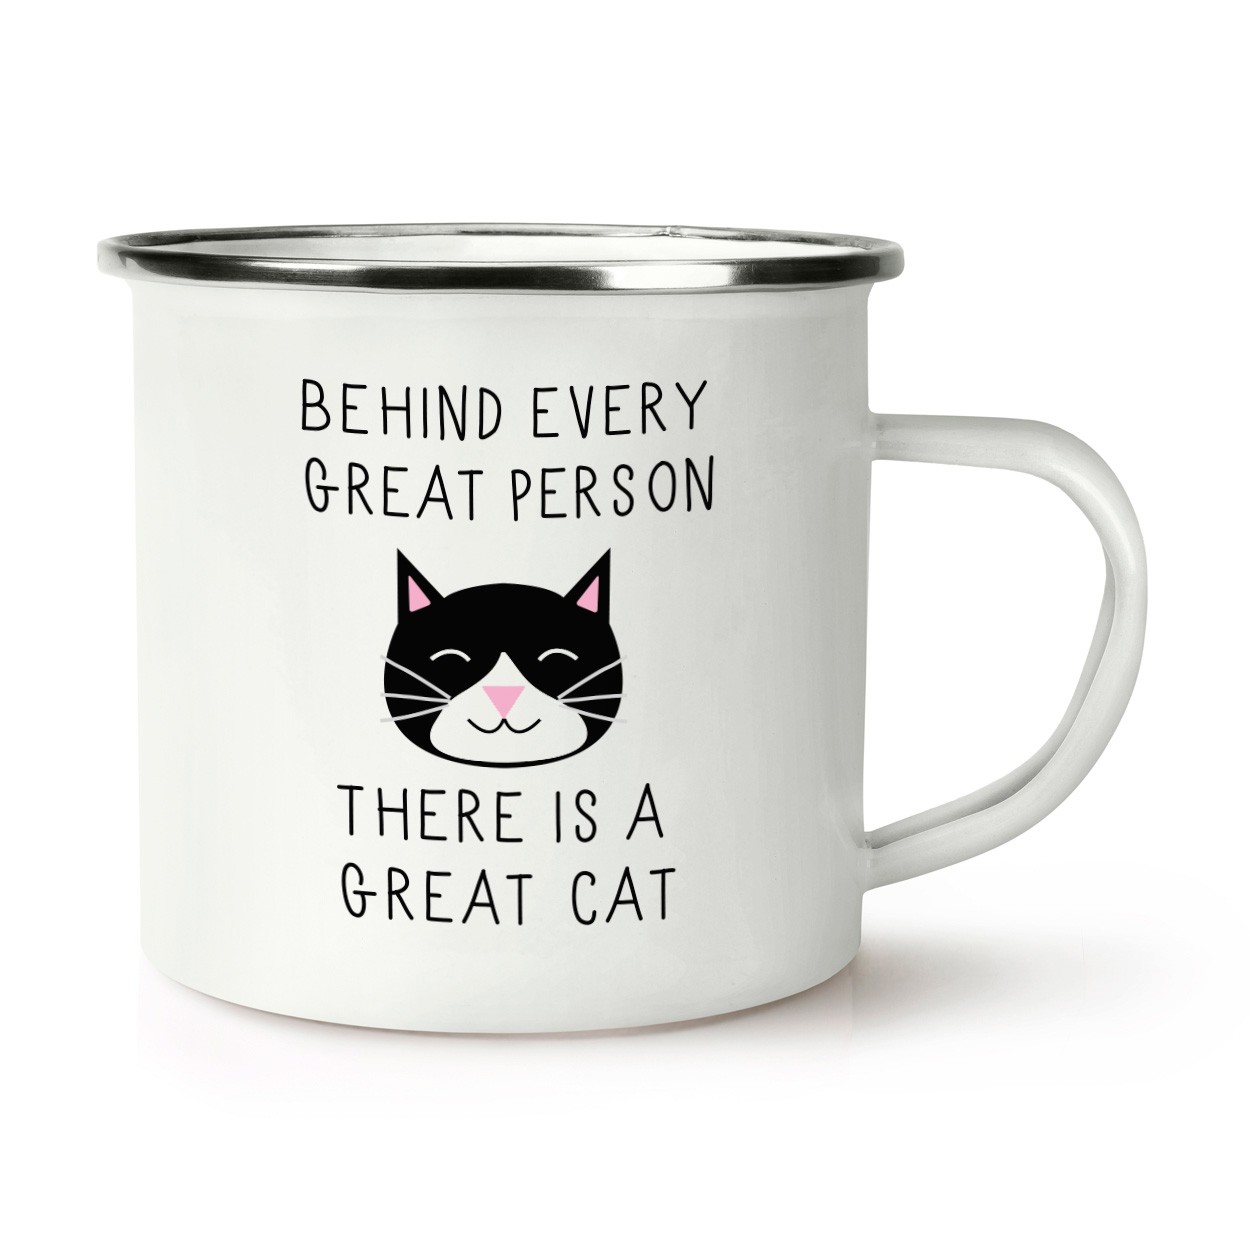 Behind Every Great Person Is A Great Cat Retro Enamel Mug Cup